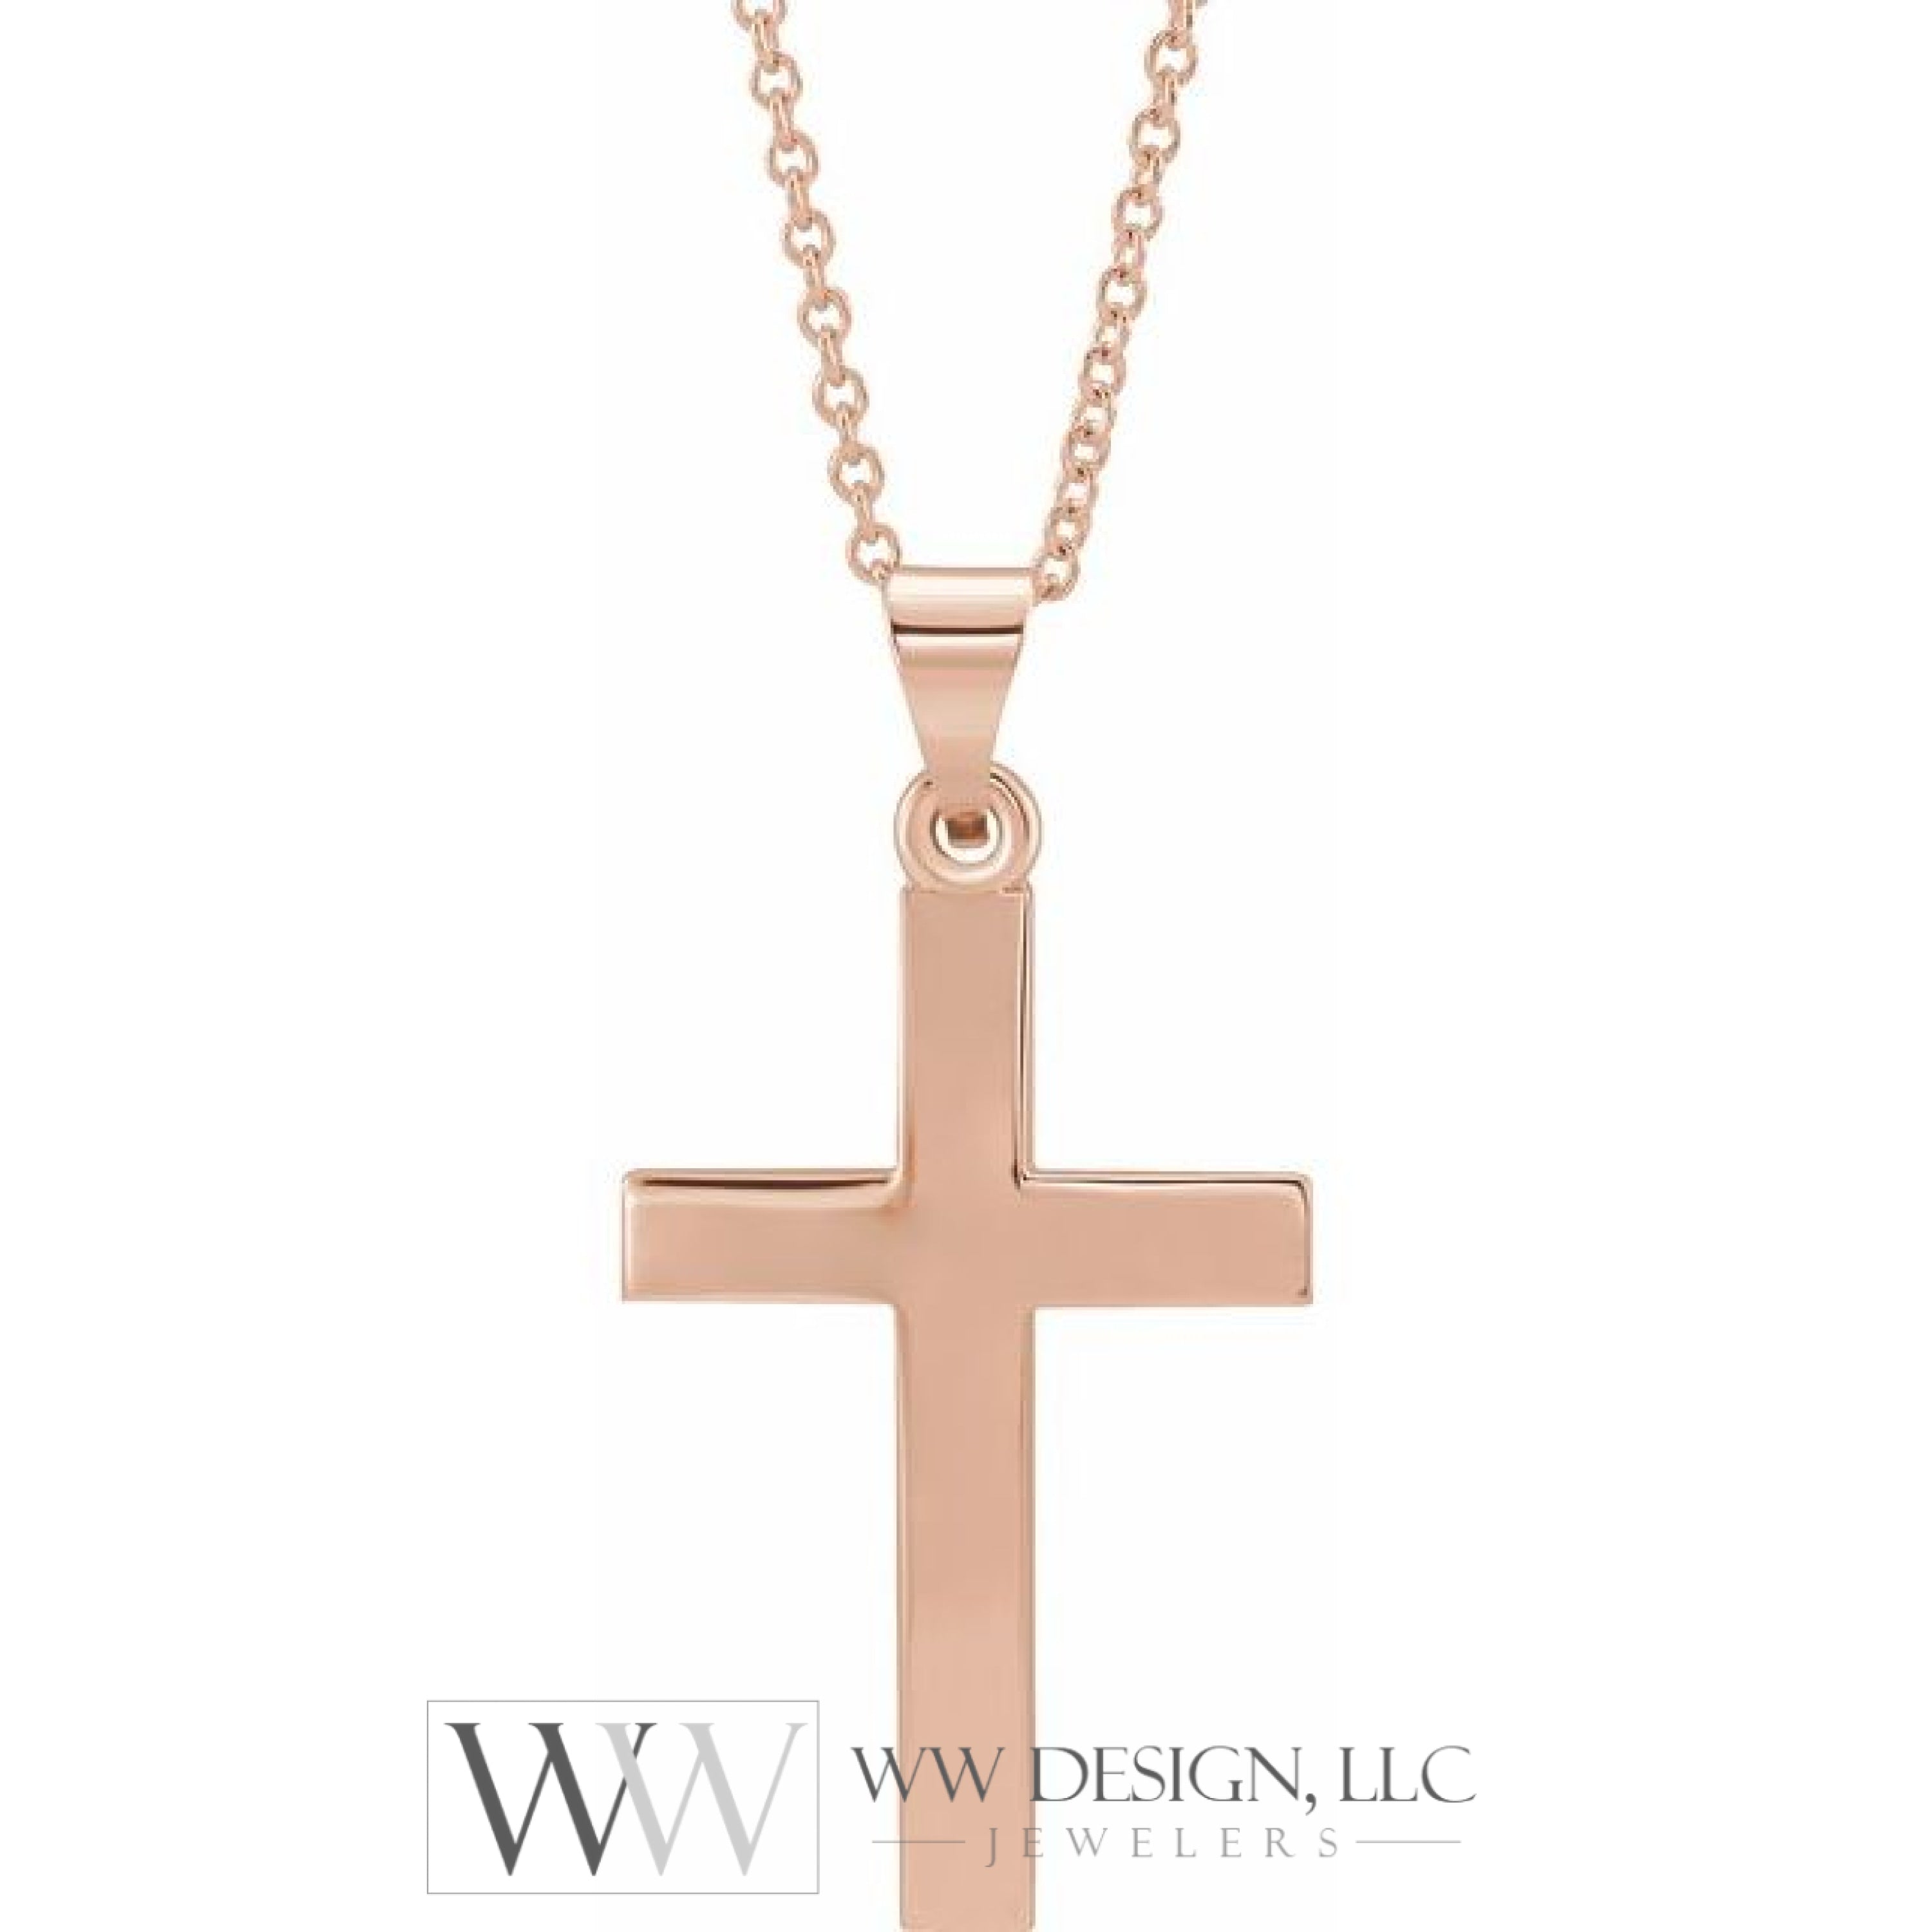 20mm x 13.7mm Cross 18" Necklace - 14K Gold (Y, W, or R), or Sterling Silver